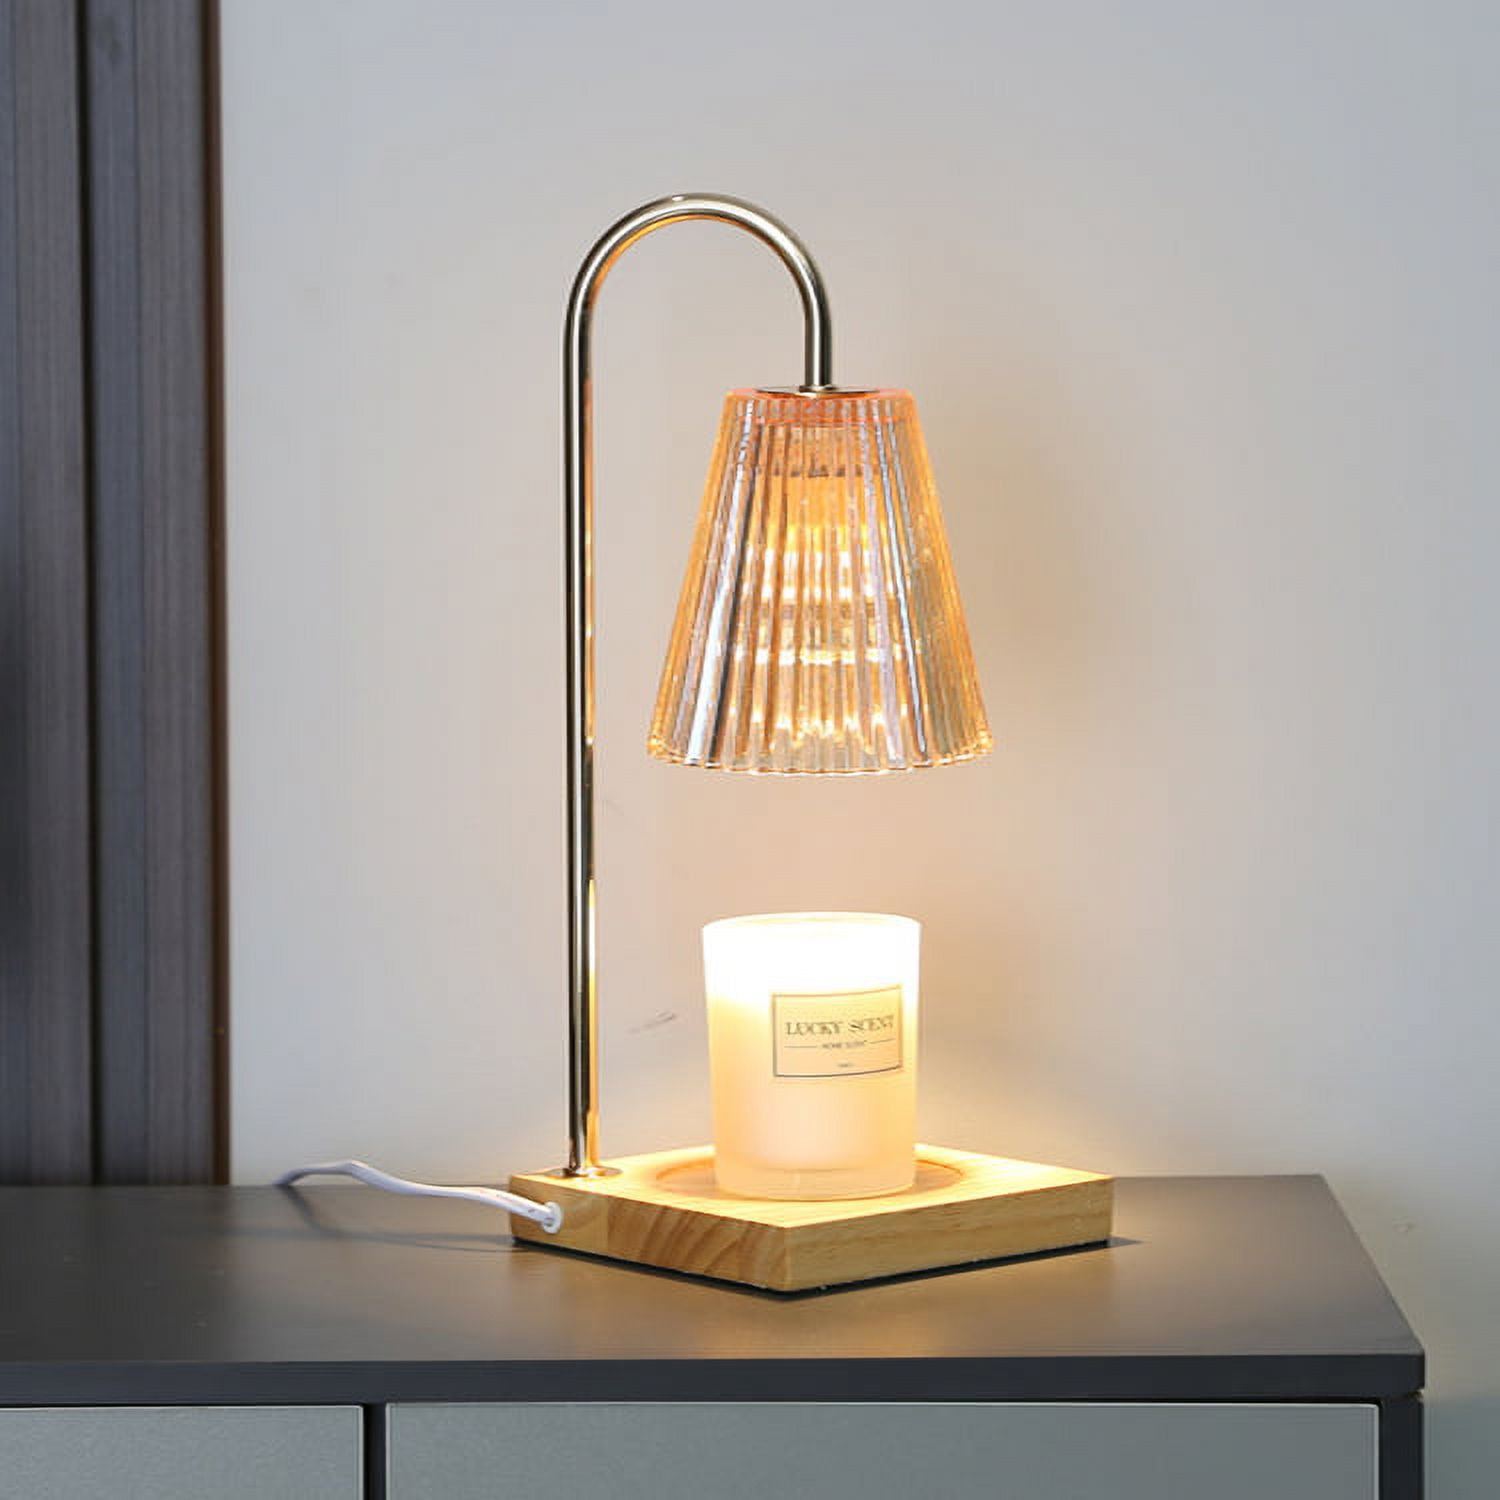 New Candle Warmer Lamps, Dimmable Candle Lamp with Wood Base, Top Down Candle  Warmer On Table